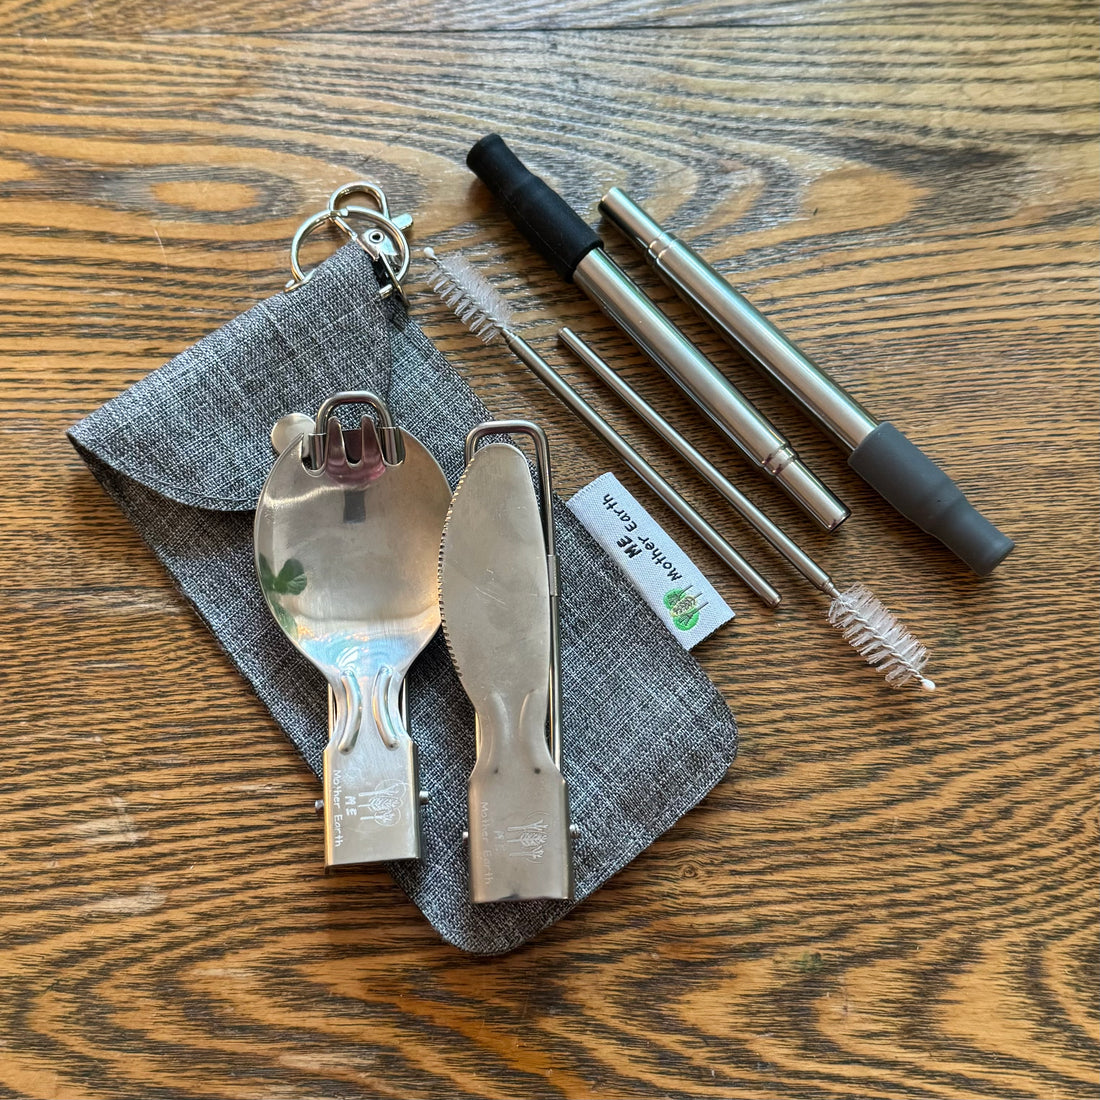 Stainless Steel Cutlery and Straws Set